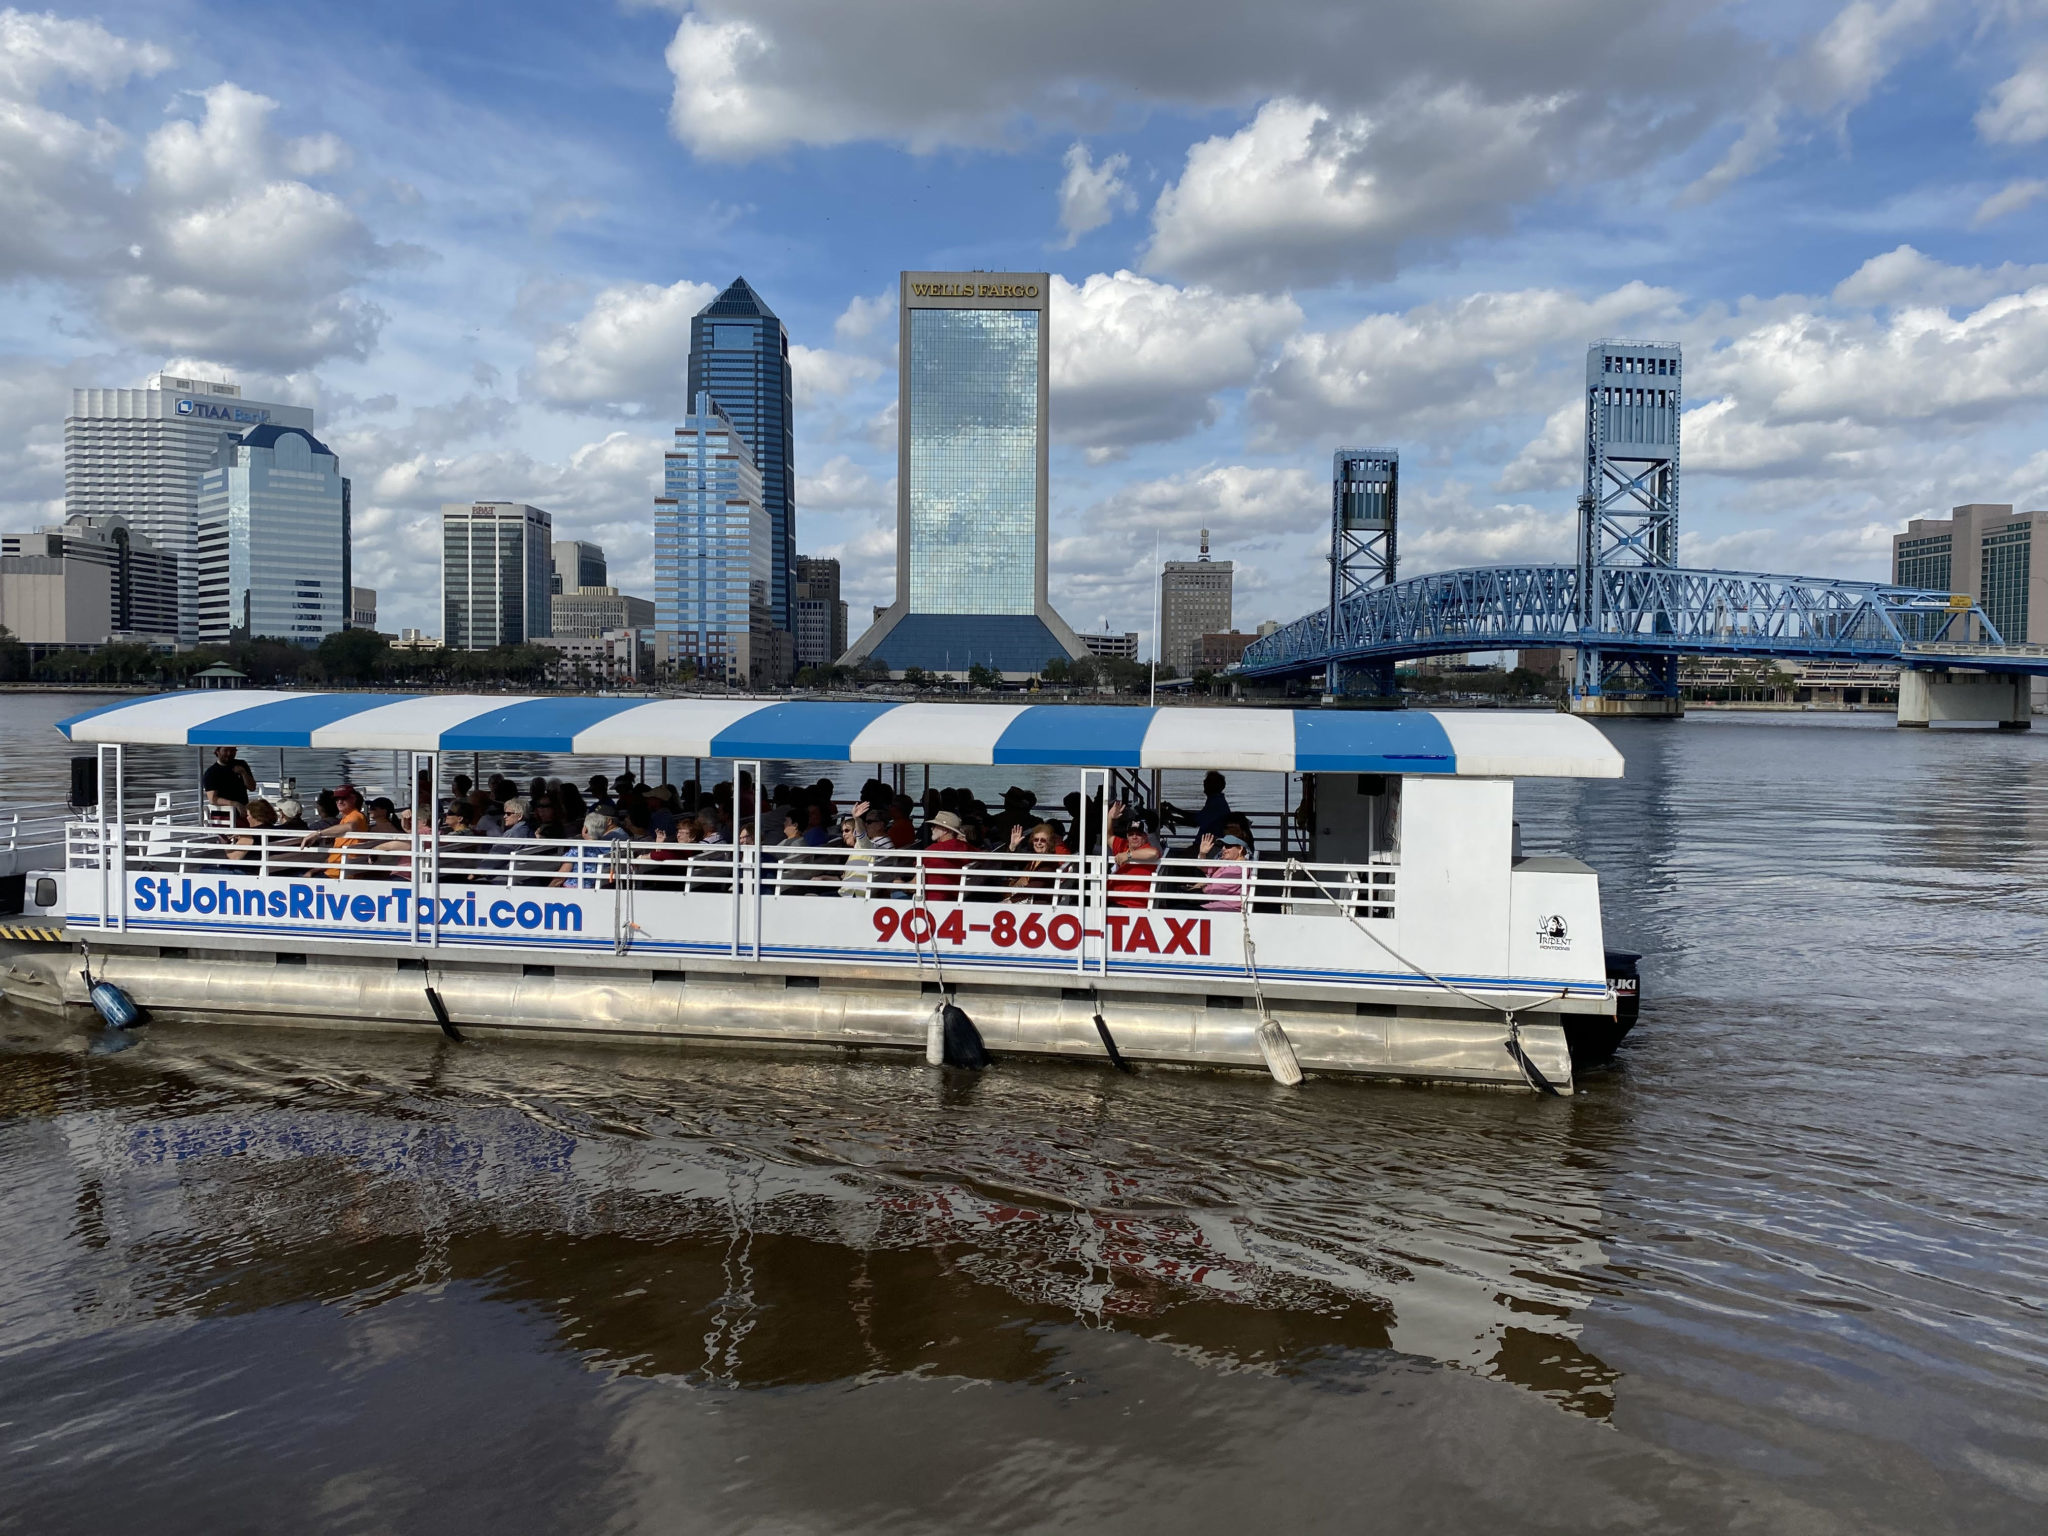 Water Taxi: St. Johns river taxi, Downtown transportation to and from the Doubletree Hotel. 2050x1540 HD Wallpaper.